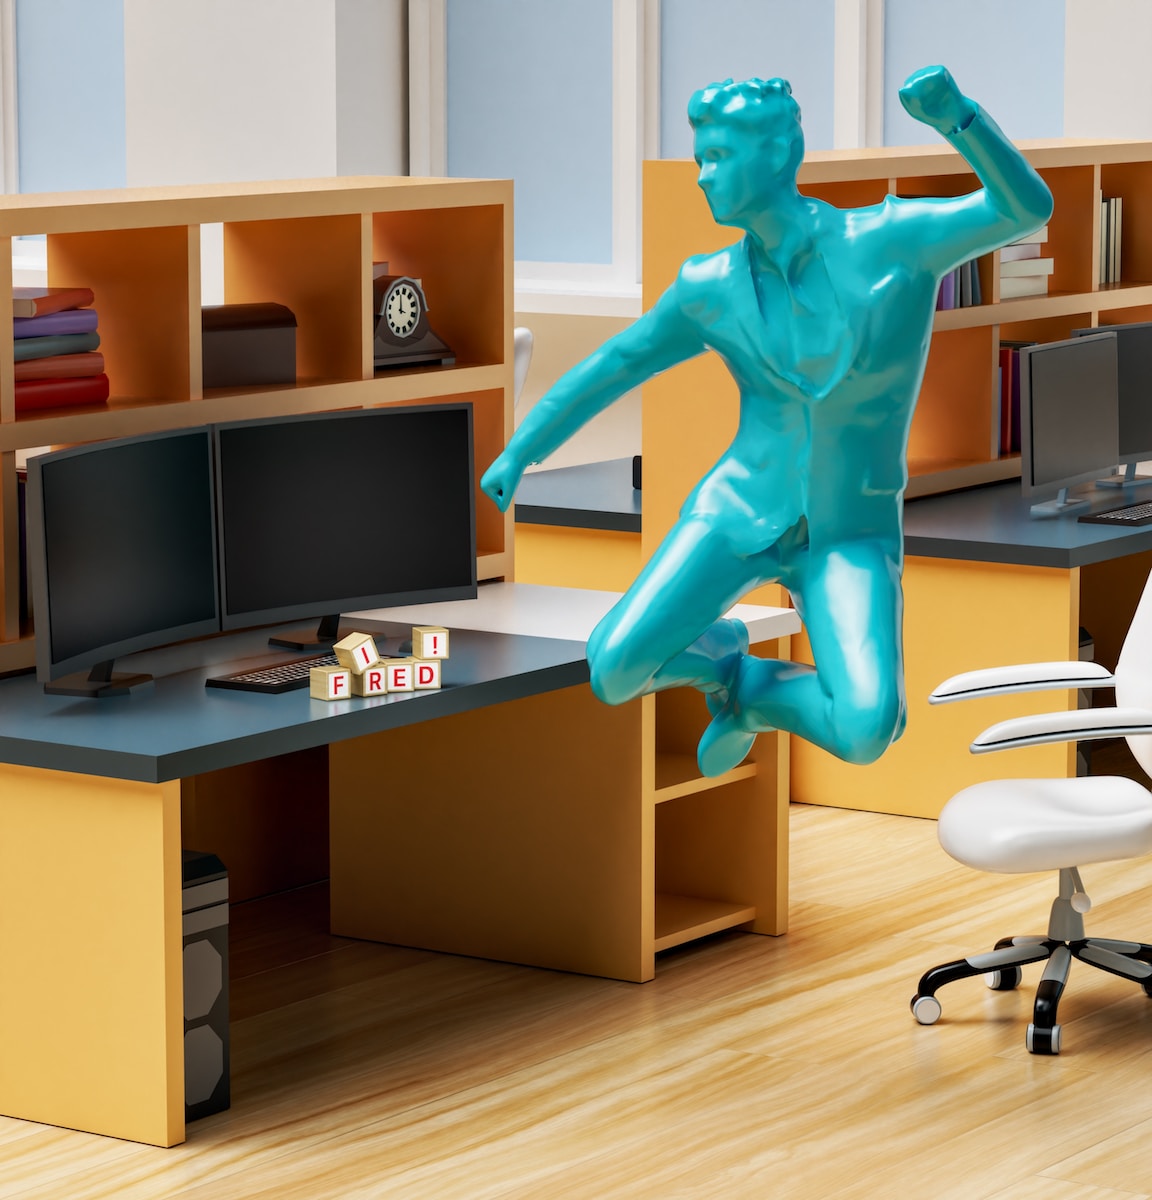 a statue of a man in the middle of an office